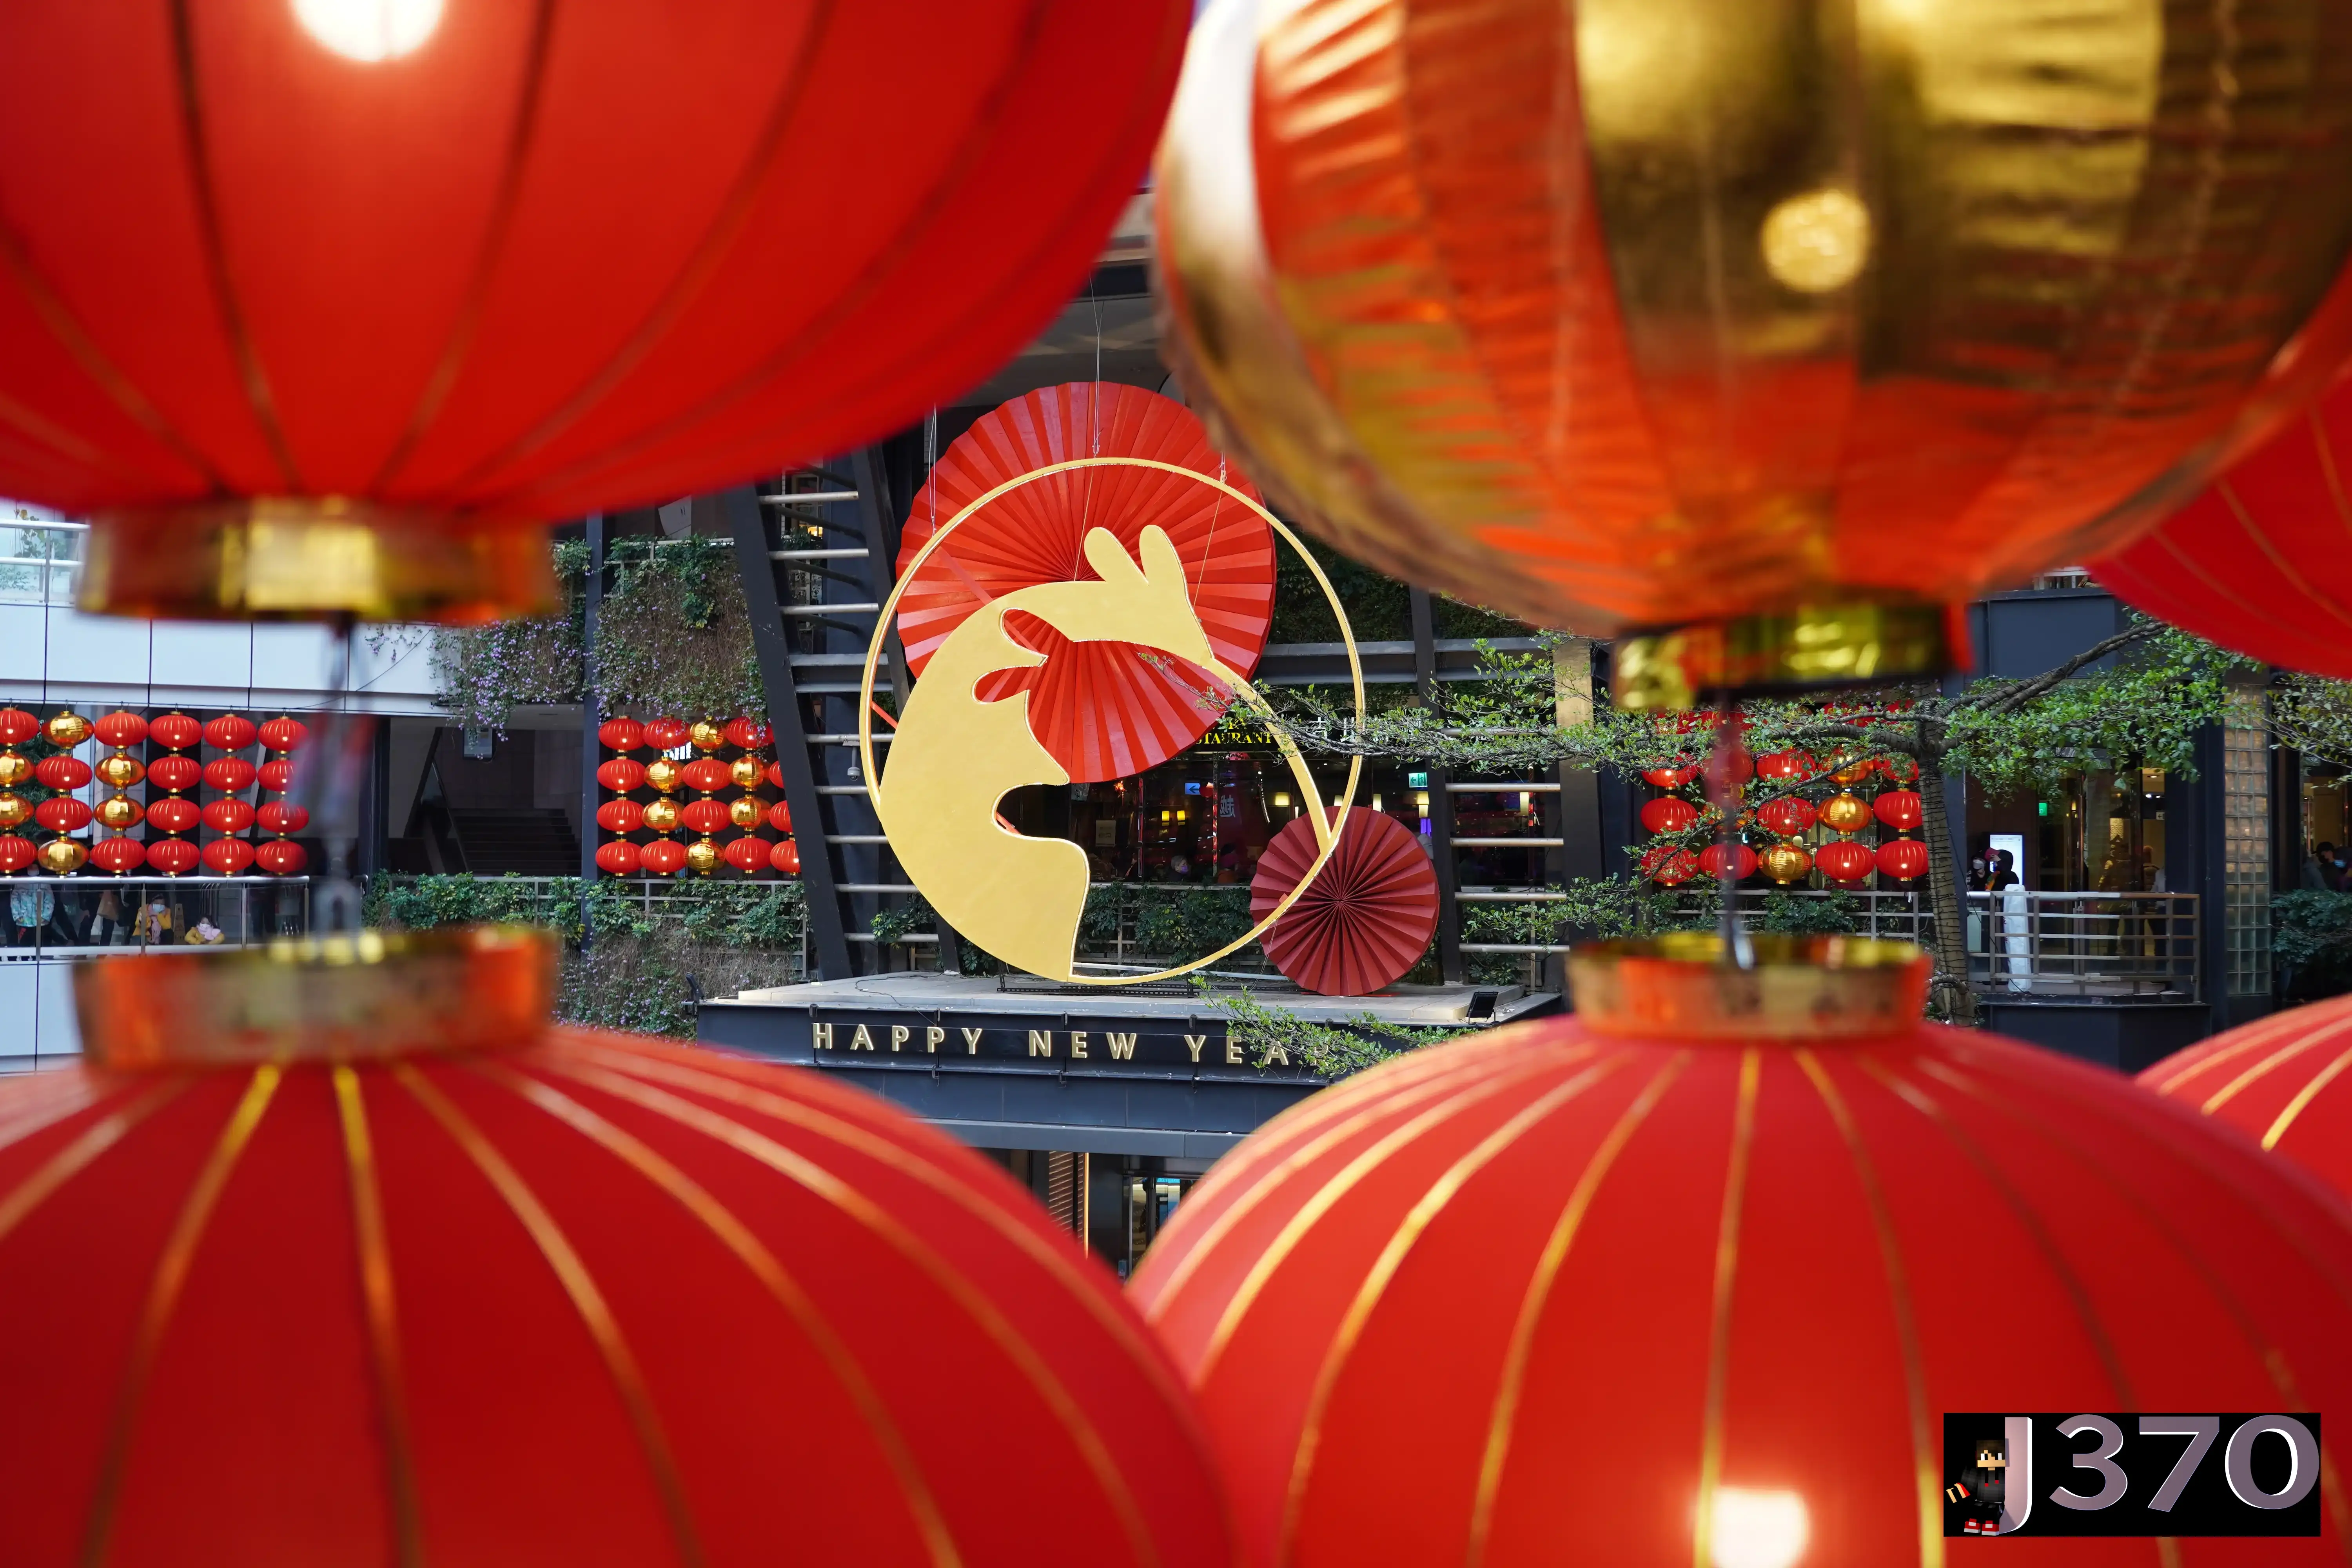 What to expect if you are traveling to Taiwan during Chinese New Year?